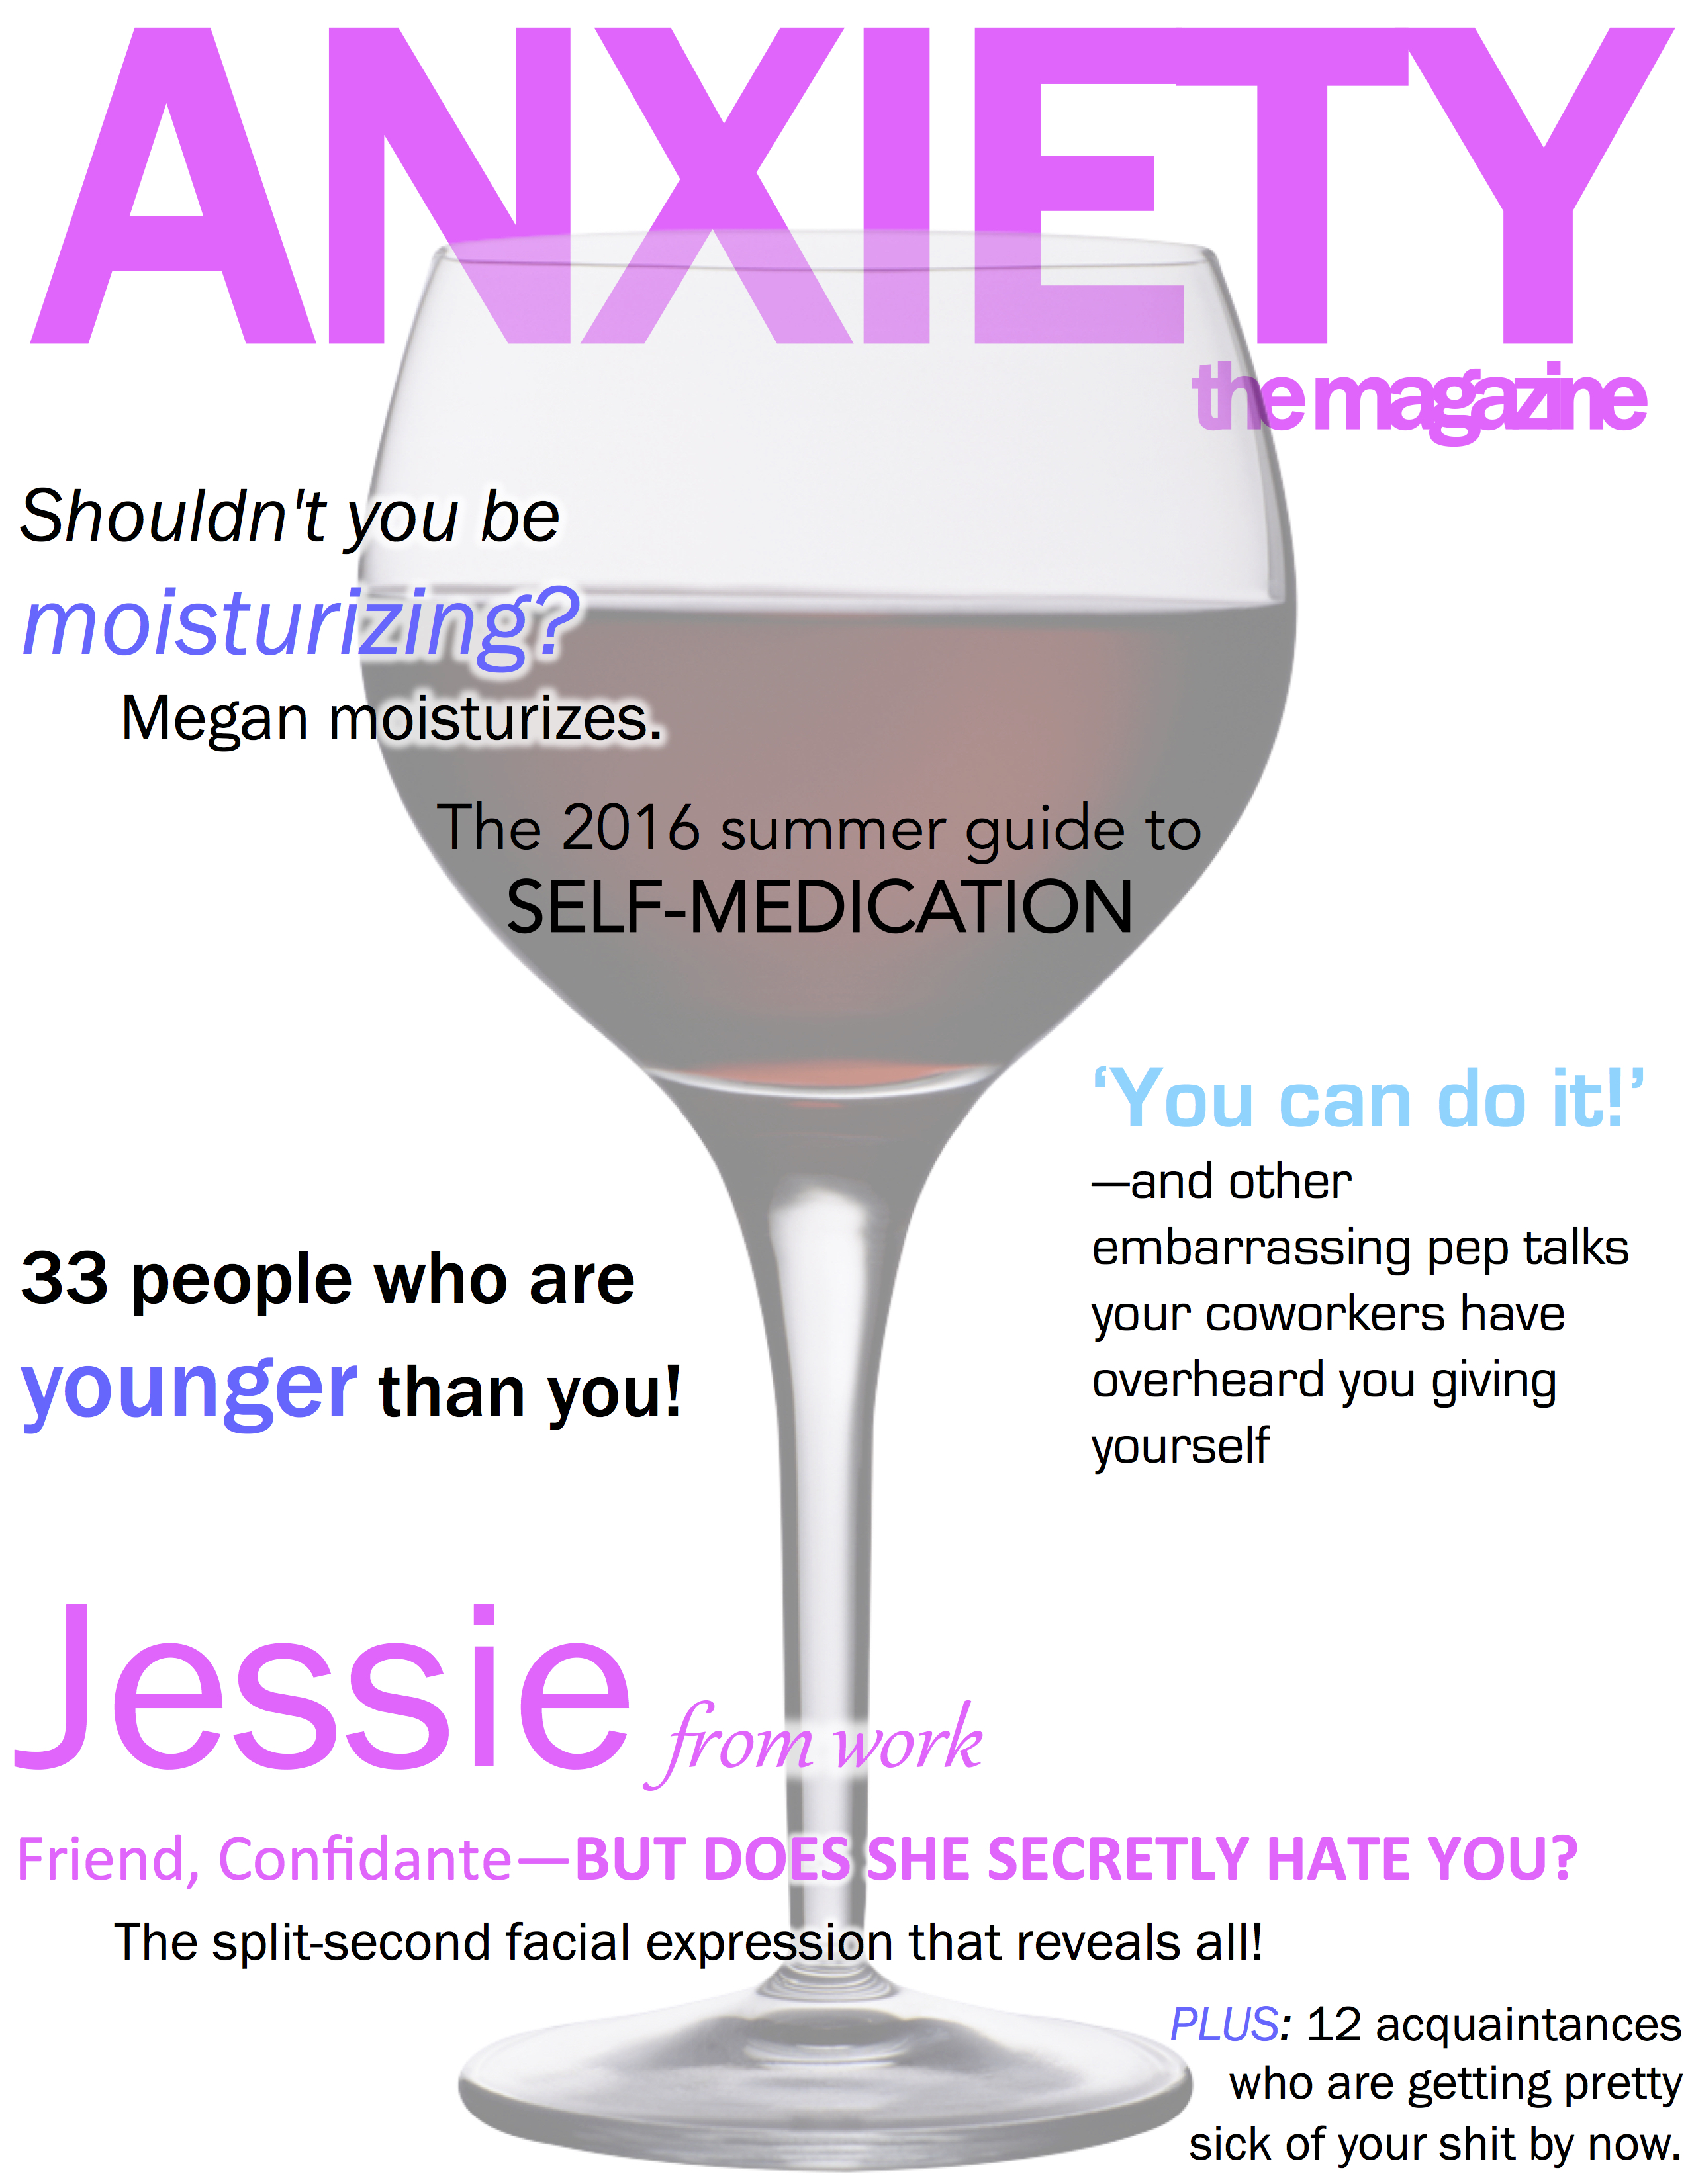 issue 2 of Anxiety